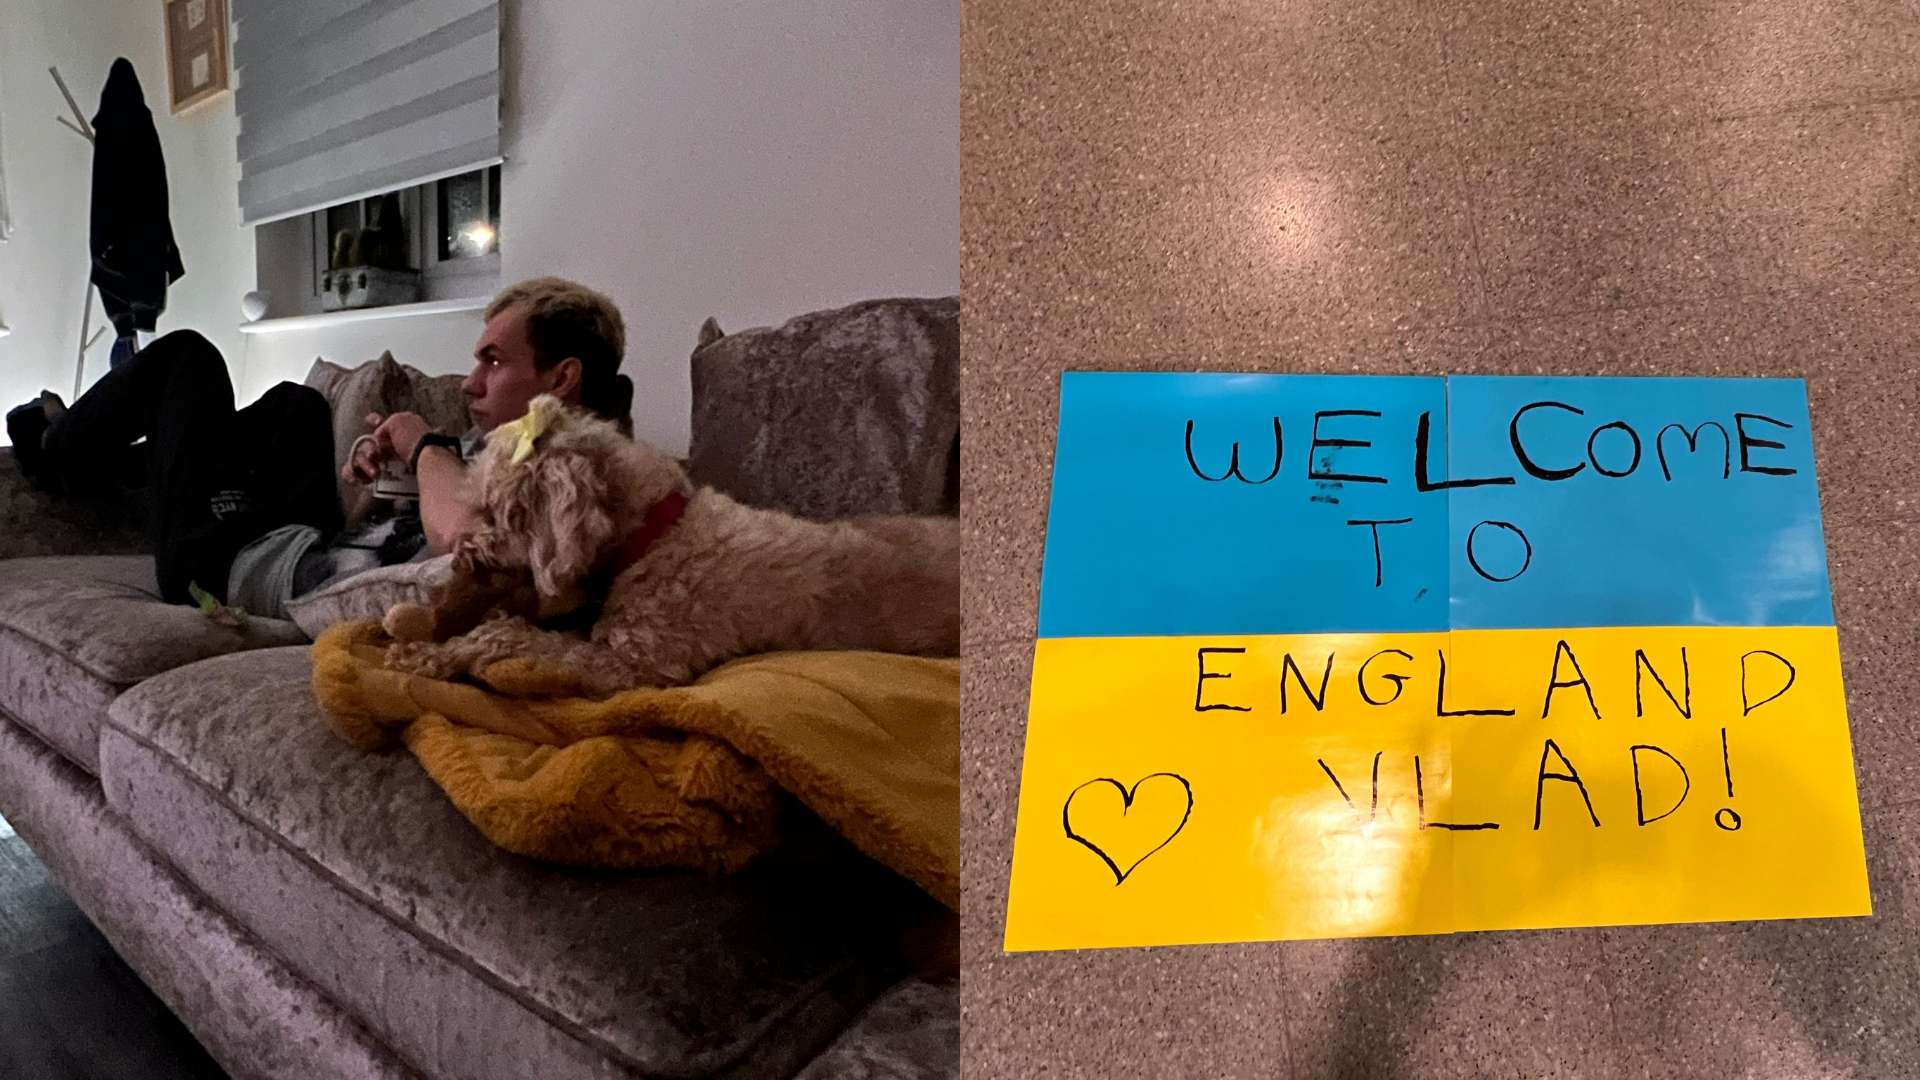 Ukrainian refugee Vlad with Canela the dog. On the right, a message welcoming Vlad to England